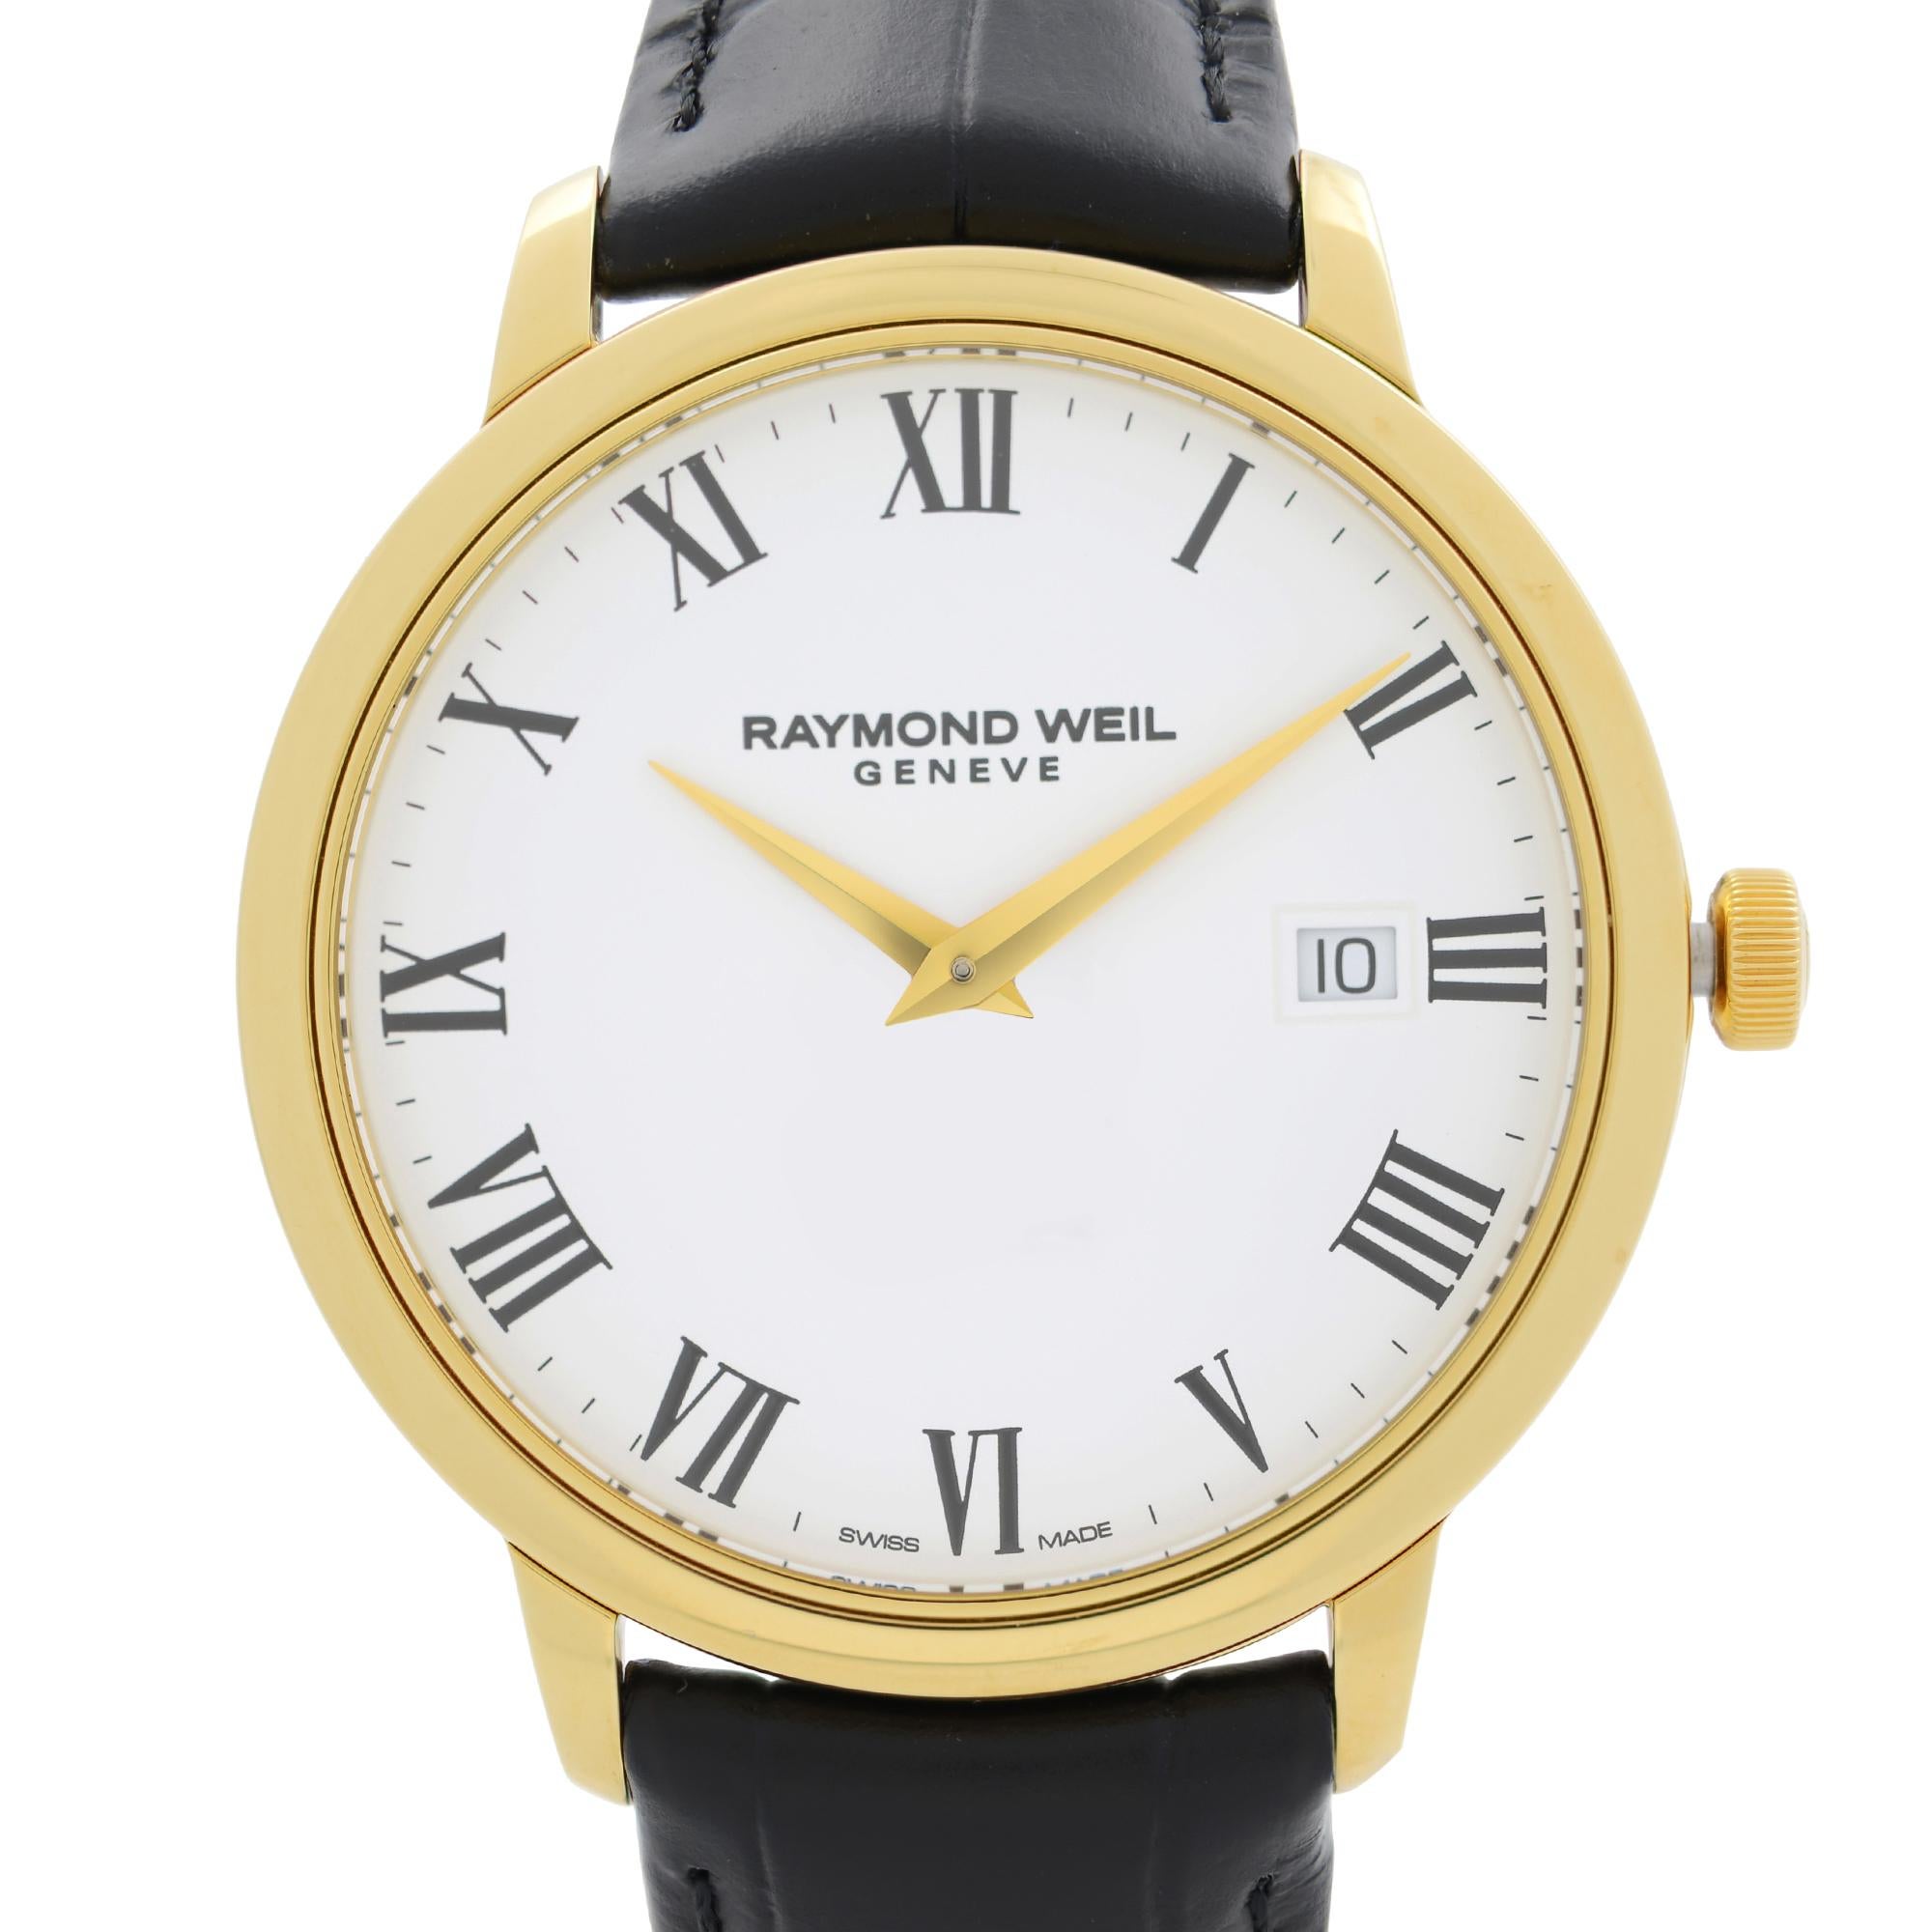 Store Display Model Never Worn. Can have minor blemishes or Missing tags and Stickers. Raymond Weil Toccata Yellow Gold-Tone Steel White Dial Quartz Men's Watch 5488-PC-00300. This Beautiful Timepiece Features: Yellow Gold-Plated Stainless Steel